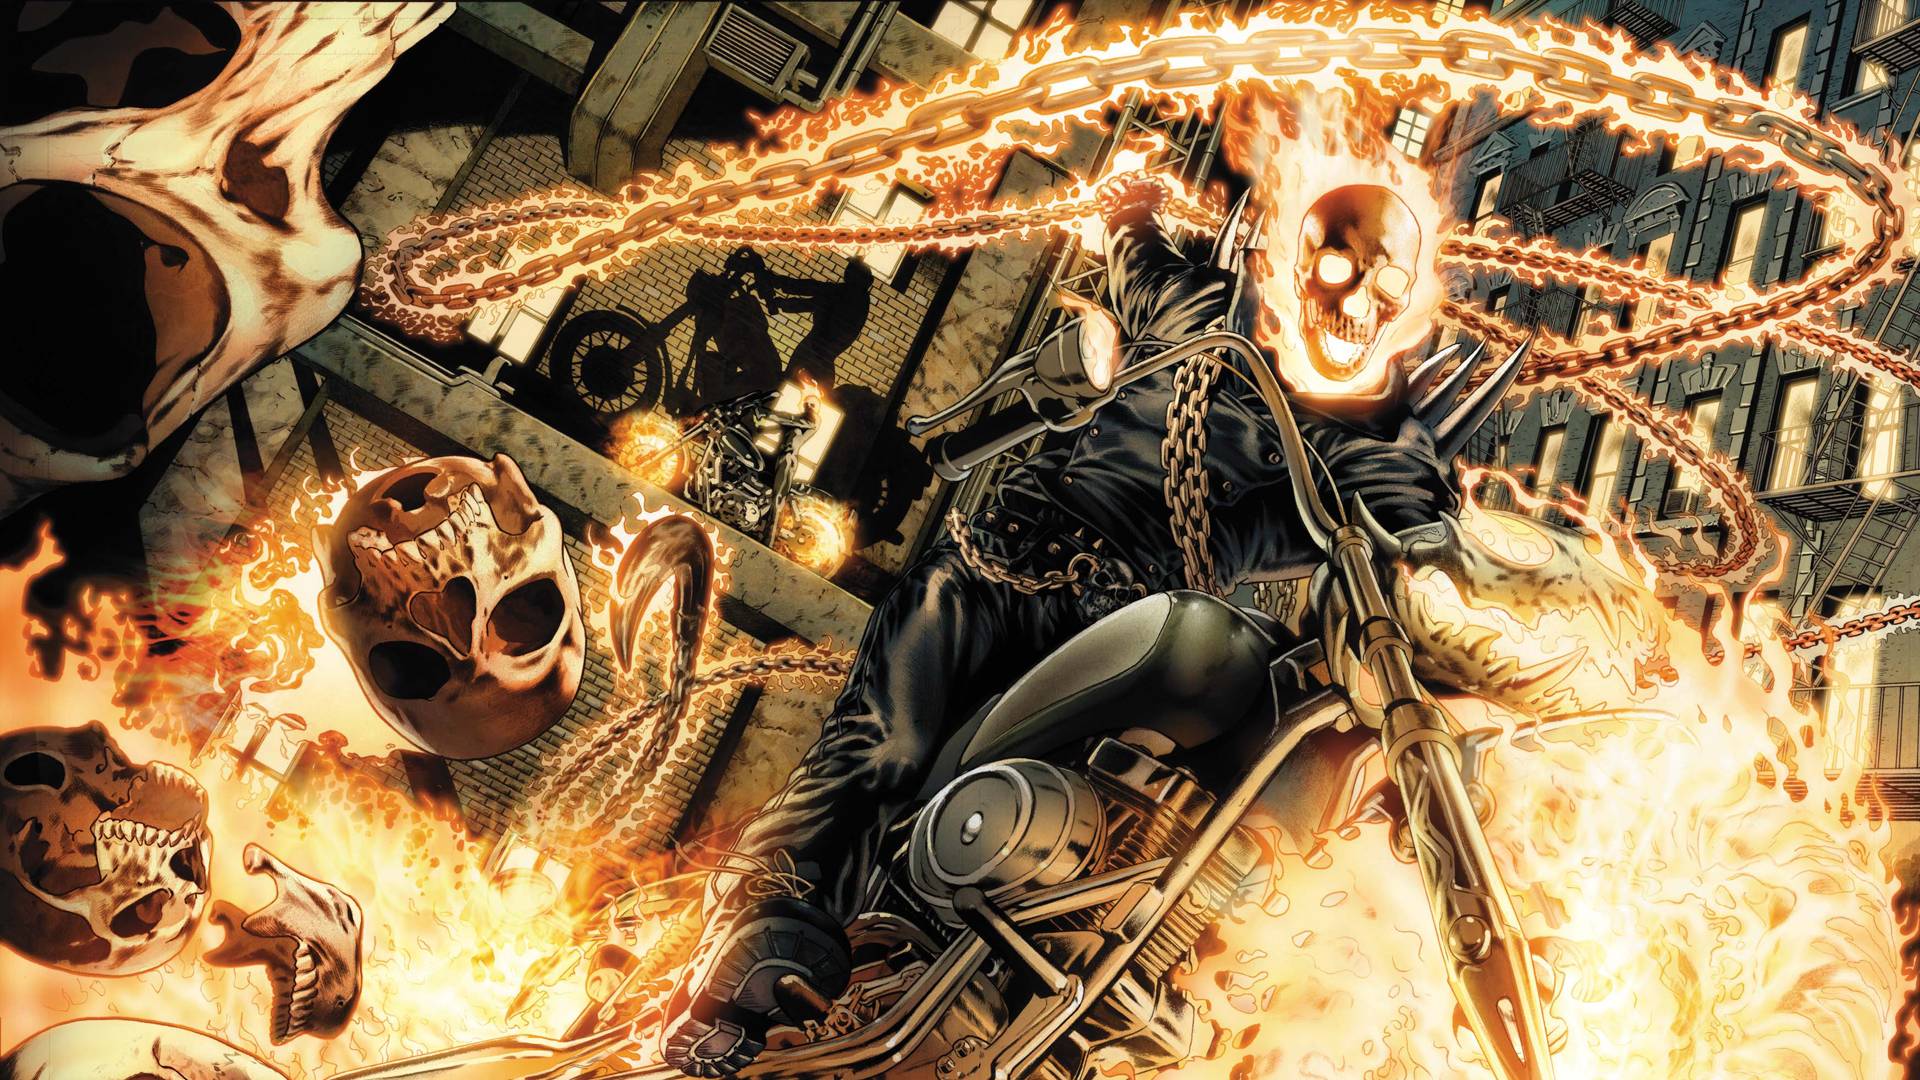 Download Ghost Rider Motorcycle Fire Flame Skull Chain wallpaper